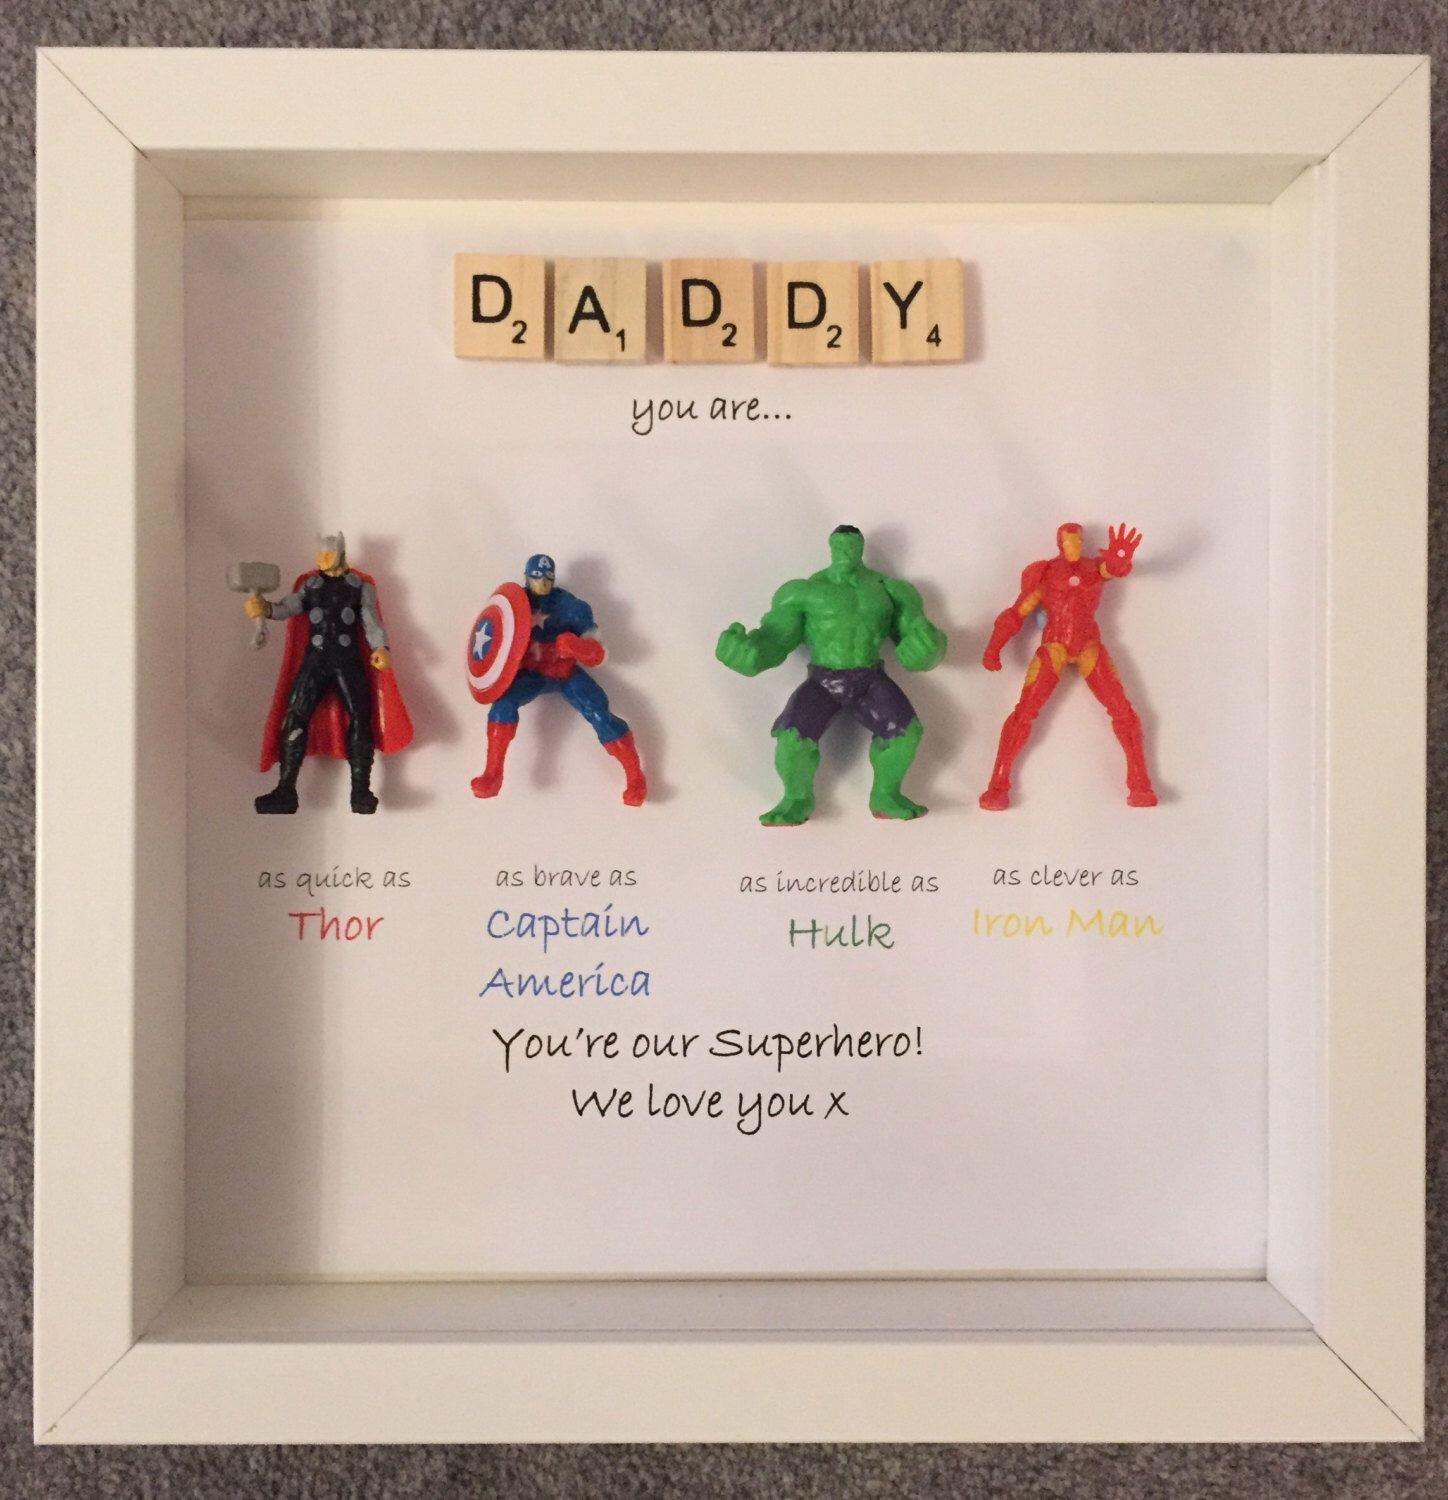 Gift Ideas For Dads Birthday
 Avengers Superhero figures frame t Ideal for dad